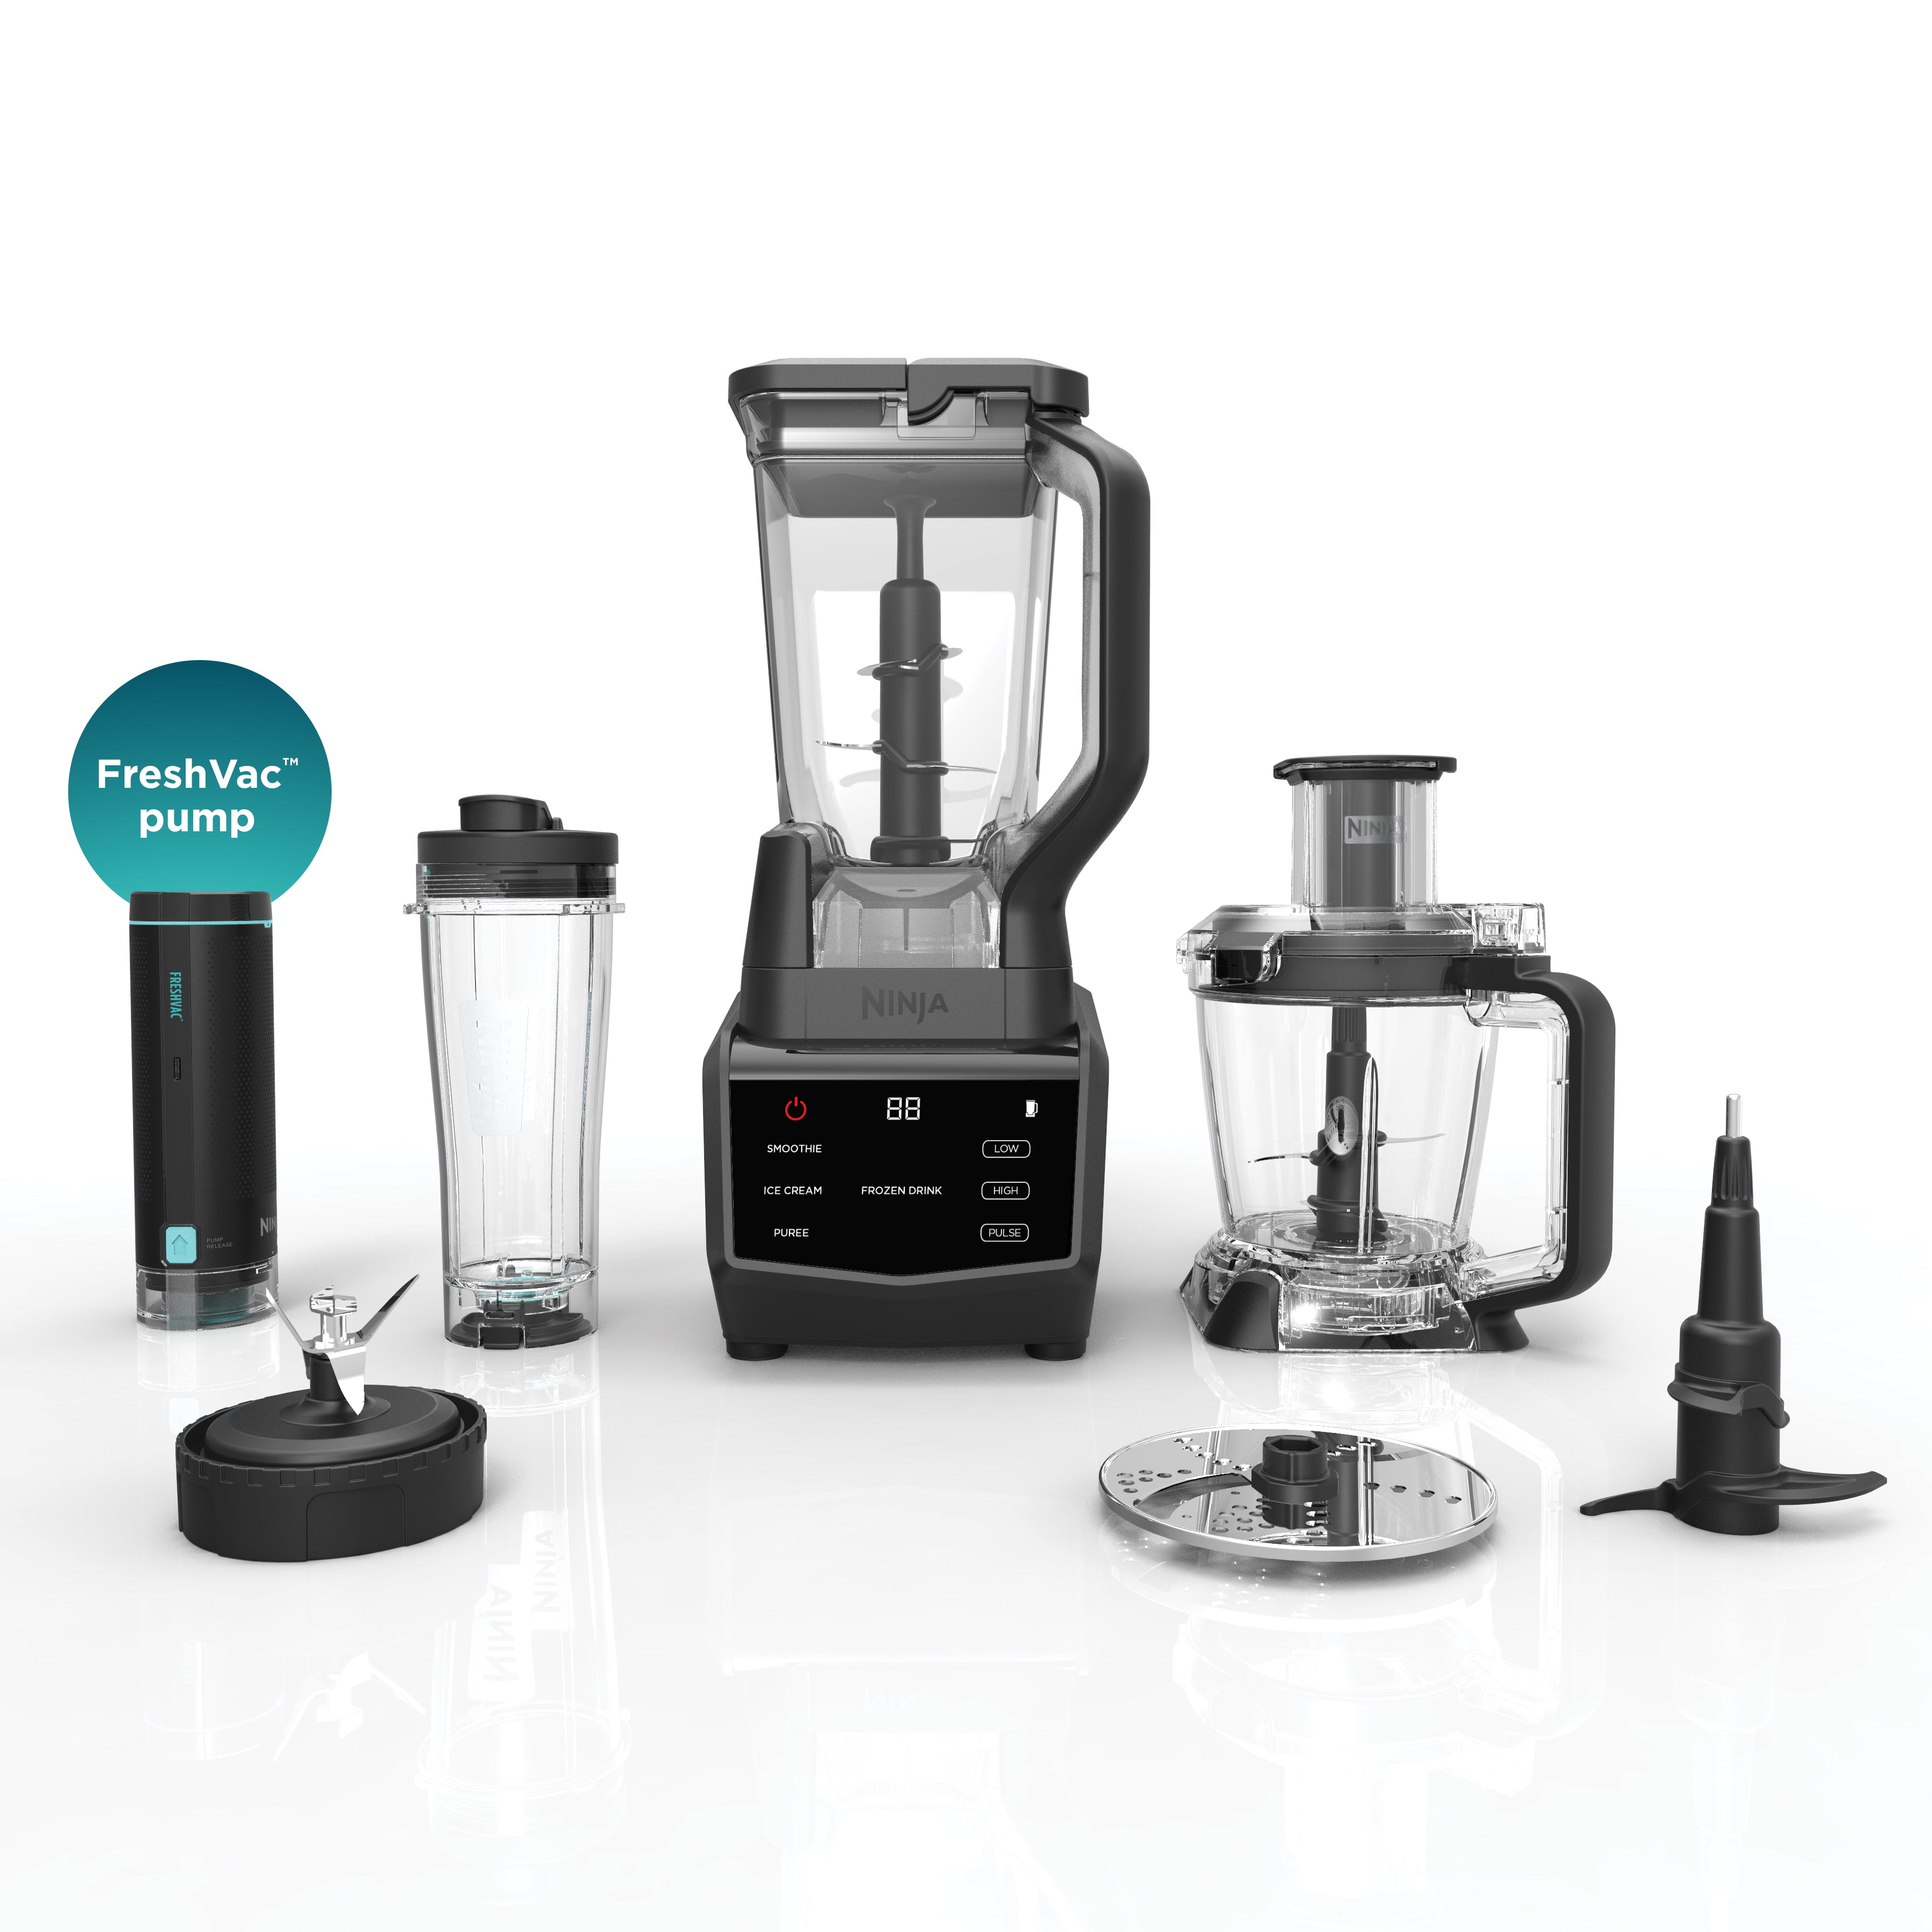 3 Things To Love About The Ninja DUO Blender - Redhead Baby Mama